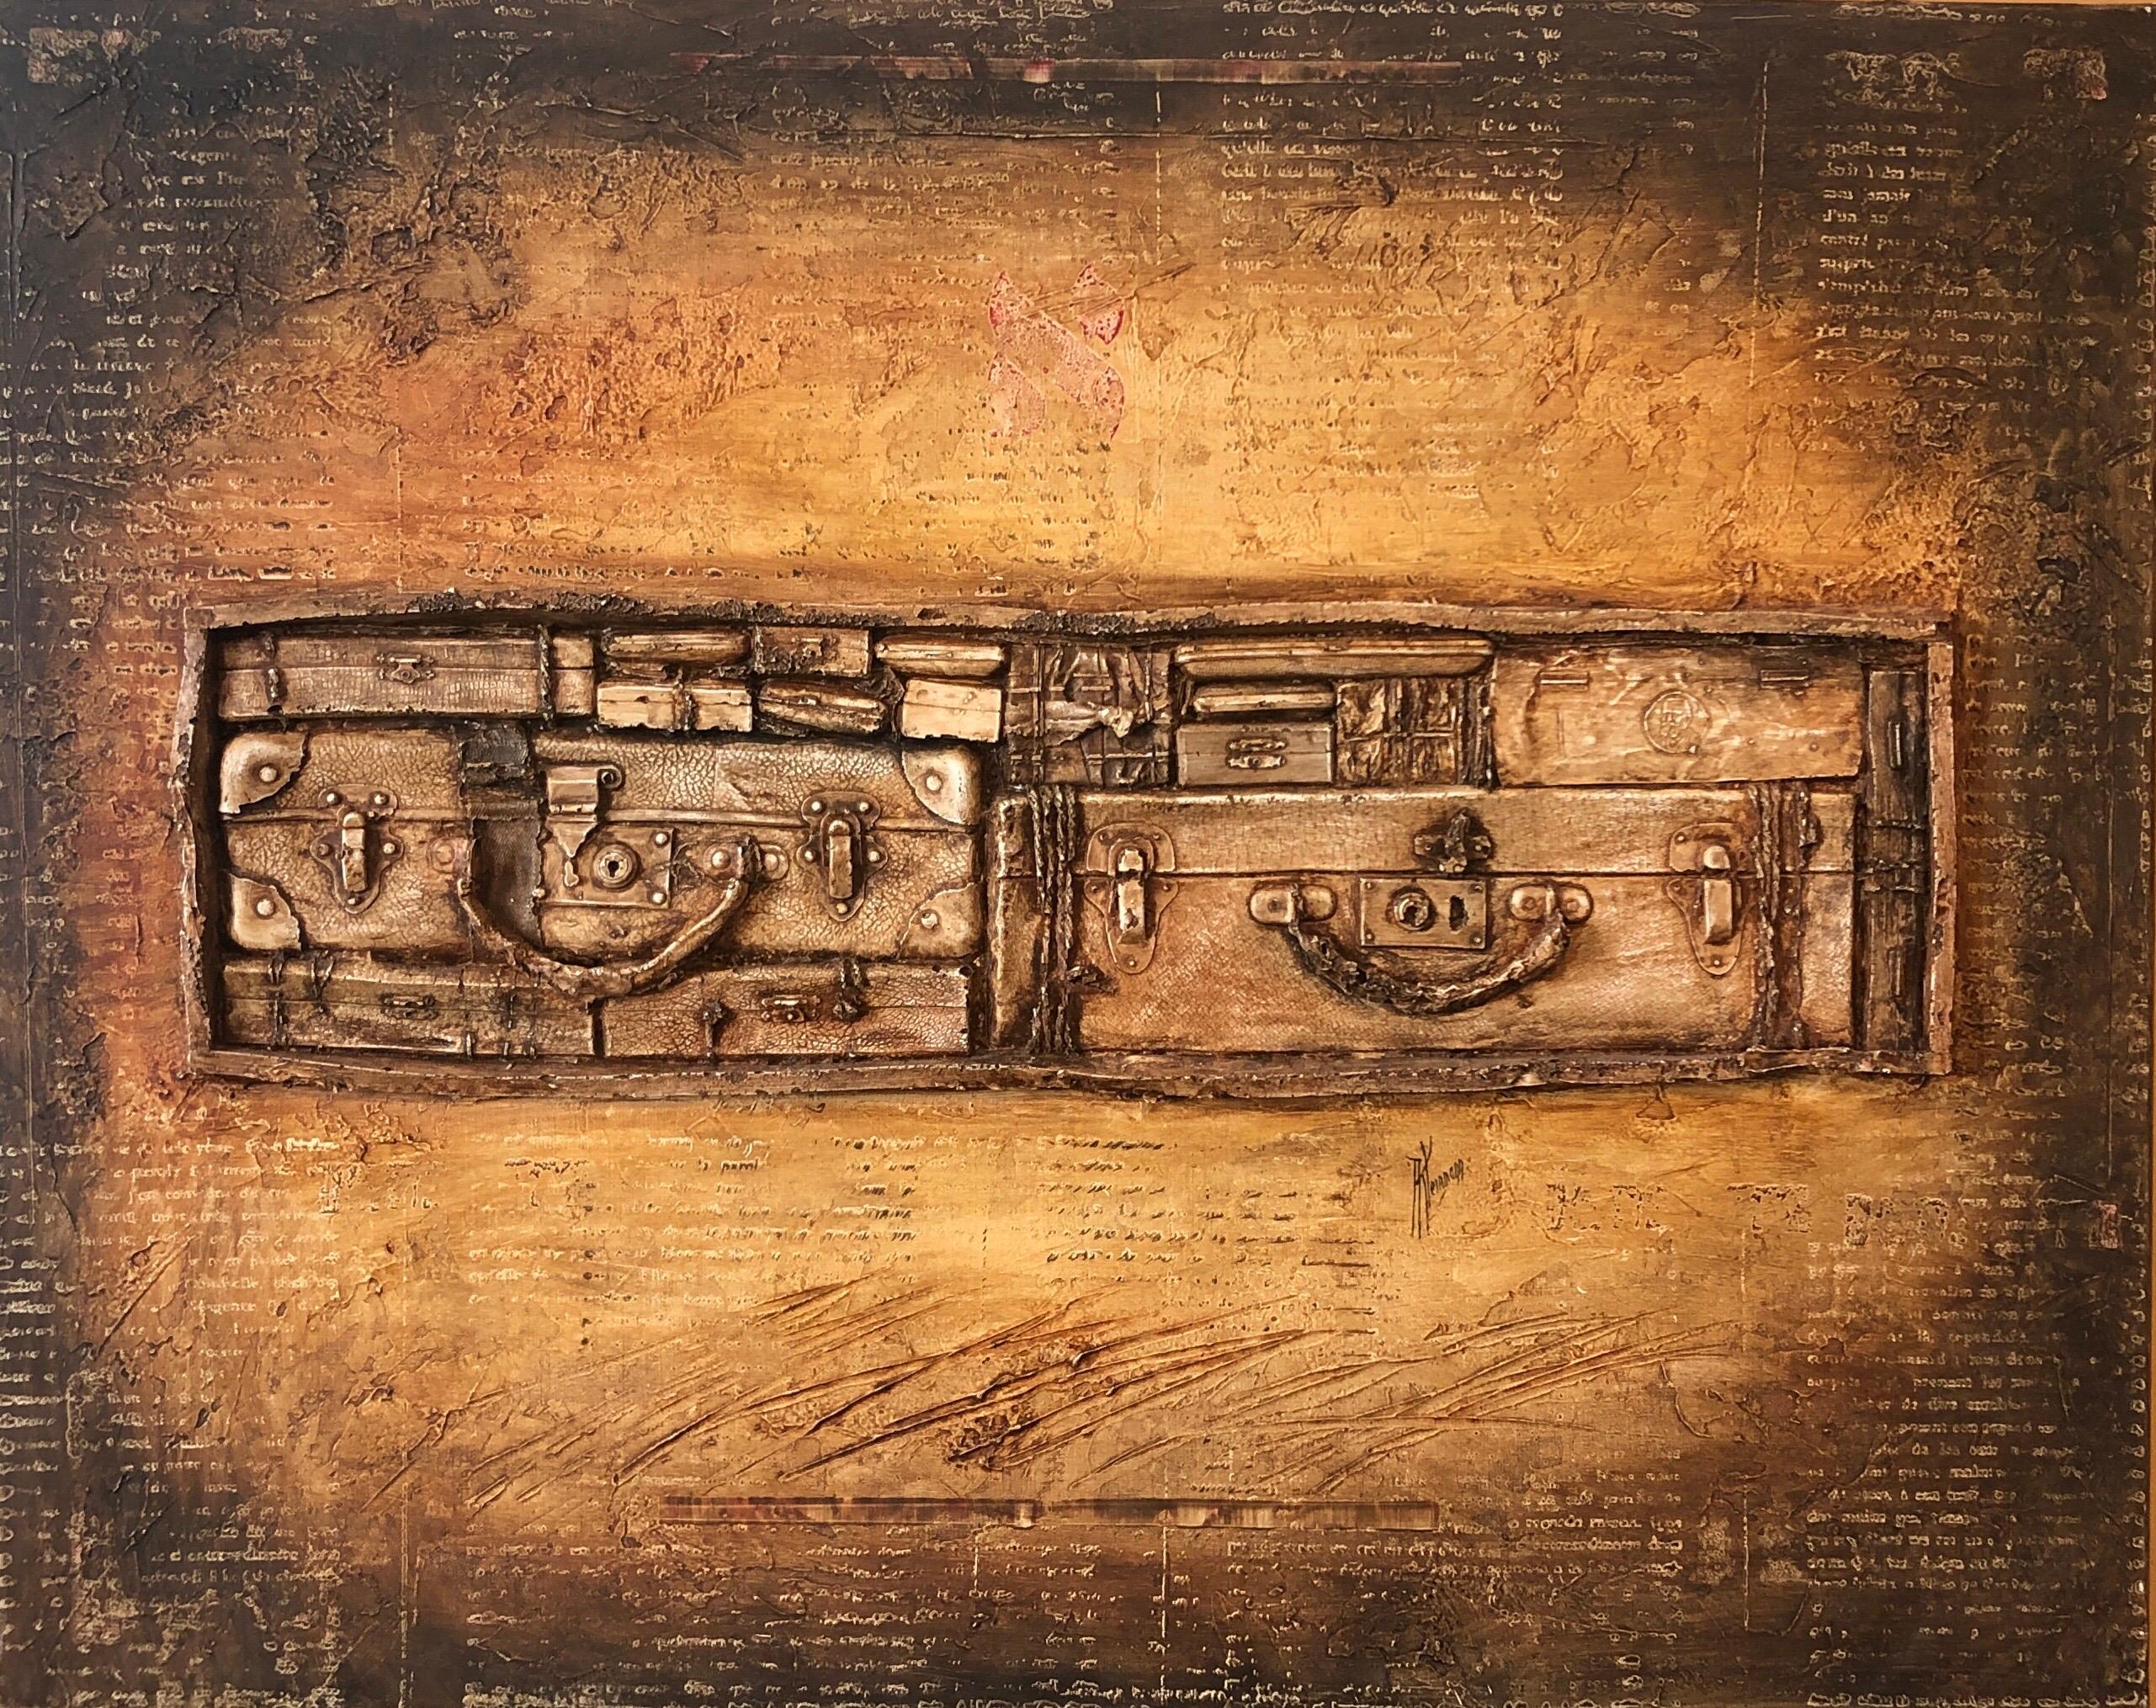 Painting measures 28 X 36 inches. There is a sulpture quality to the suitcase, it has texture to the piece. It subtly recalls the european Holocaust, travel and displacement. Provenance: Ginsburg collection; purchased from Galerie Art Temoin, Paris,